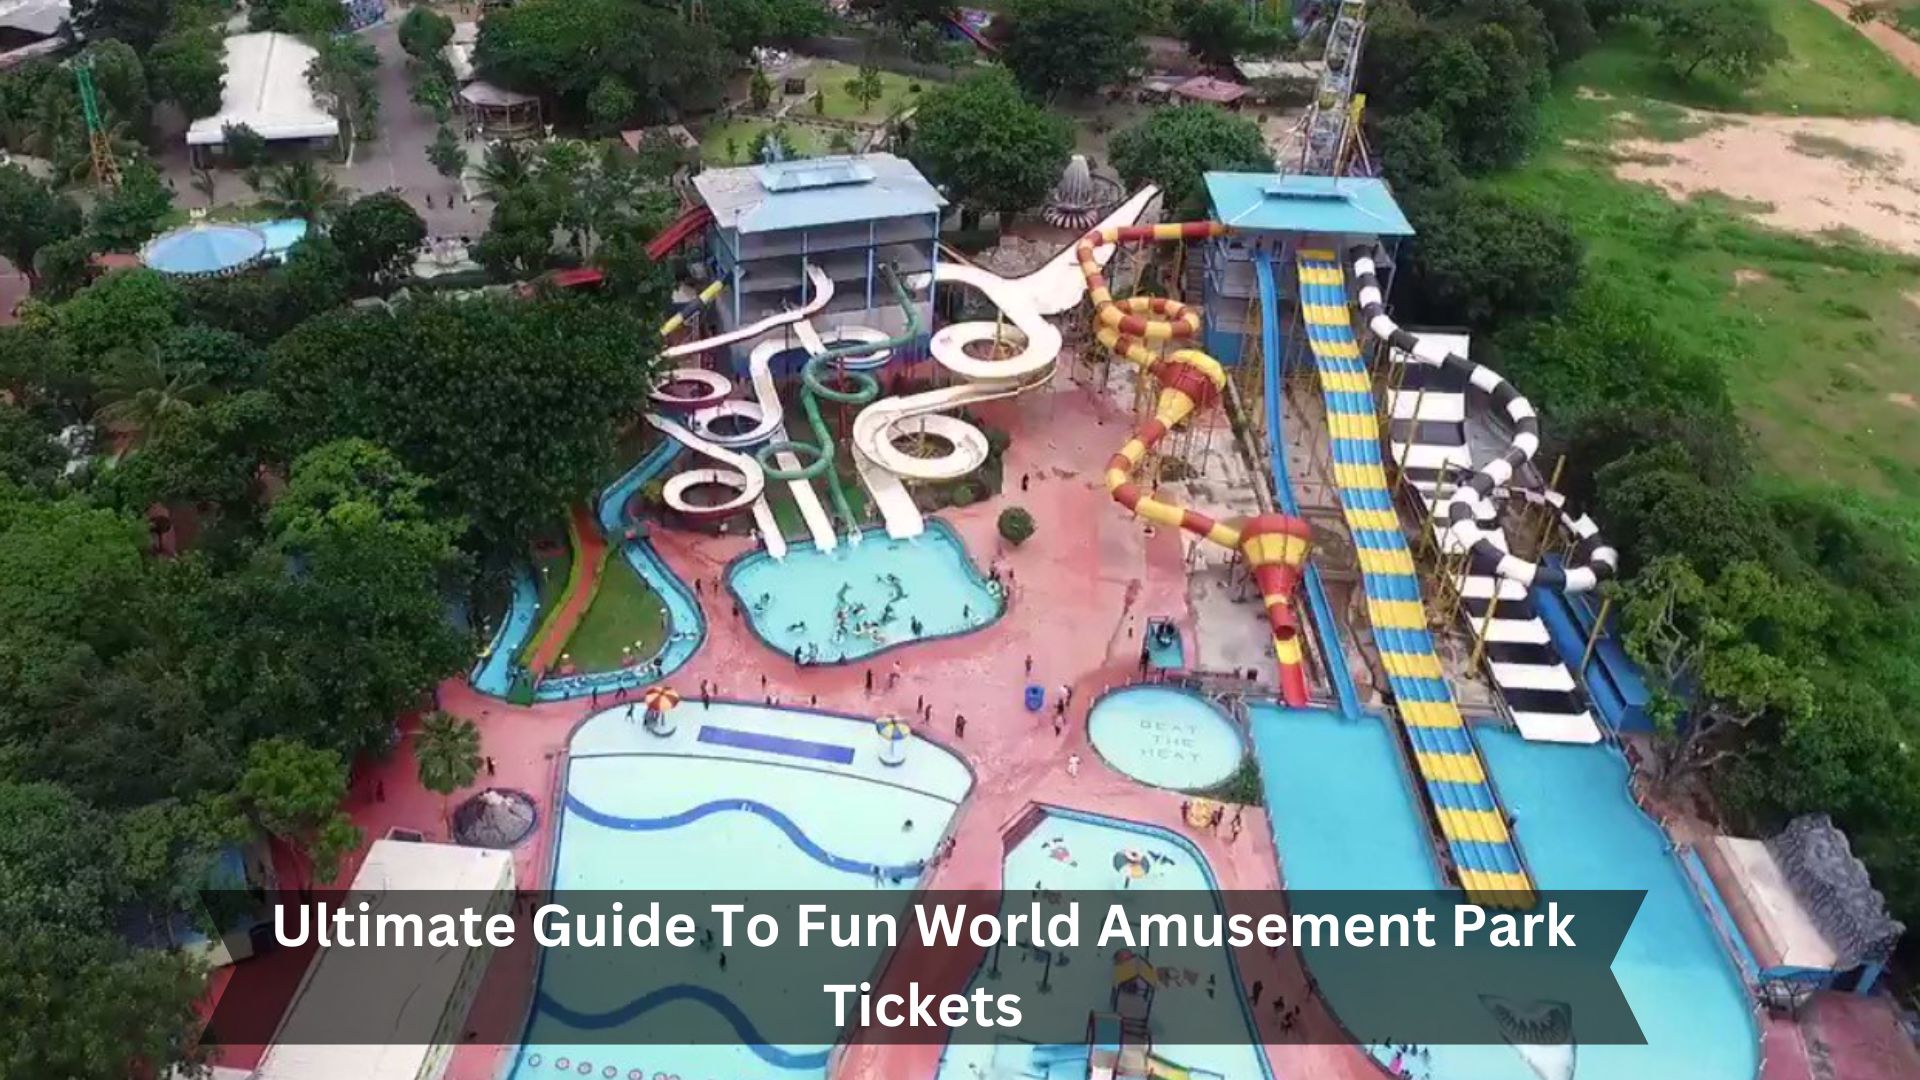 Ultimate-Guide-To-Fun-World-Amusement-Park-Tickets